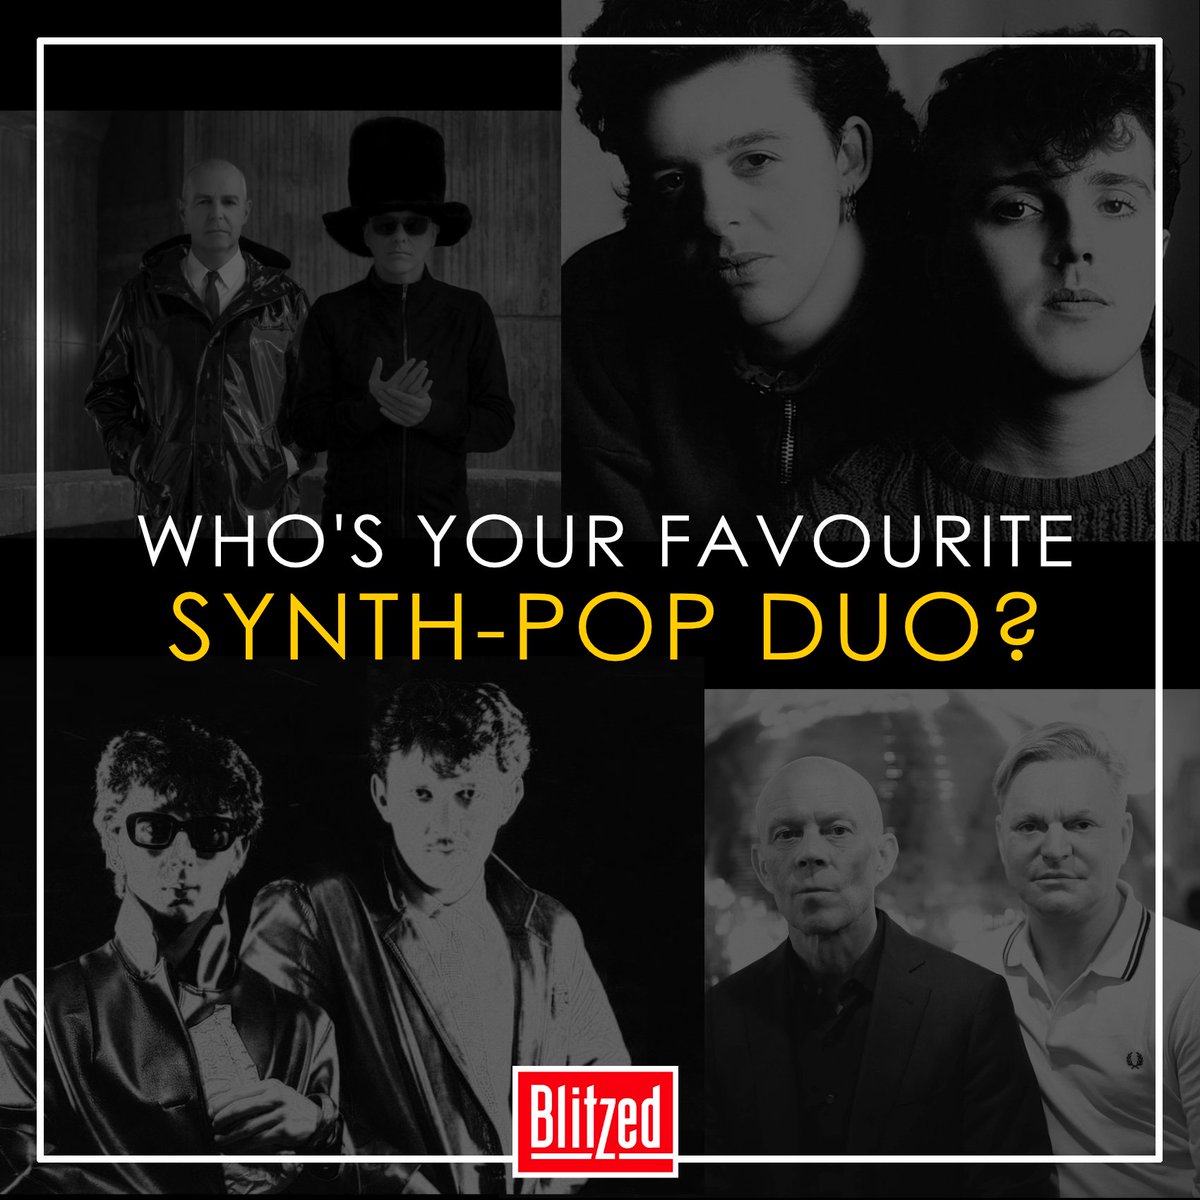 The 1980s saw the dawn of the classic synth-pop scene, which also included a wealth of duos; partnerships that delivered some of the most notable electronic pop songs of their era. But which synth-pop duo was your personal favourite?

#synthpop #80s #80spop #synth, #electronic